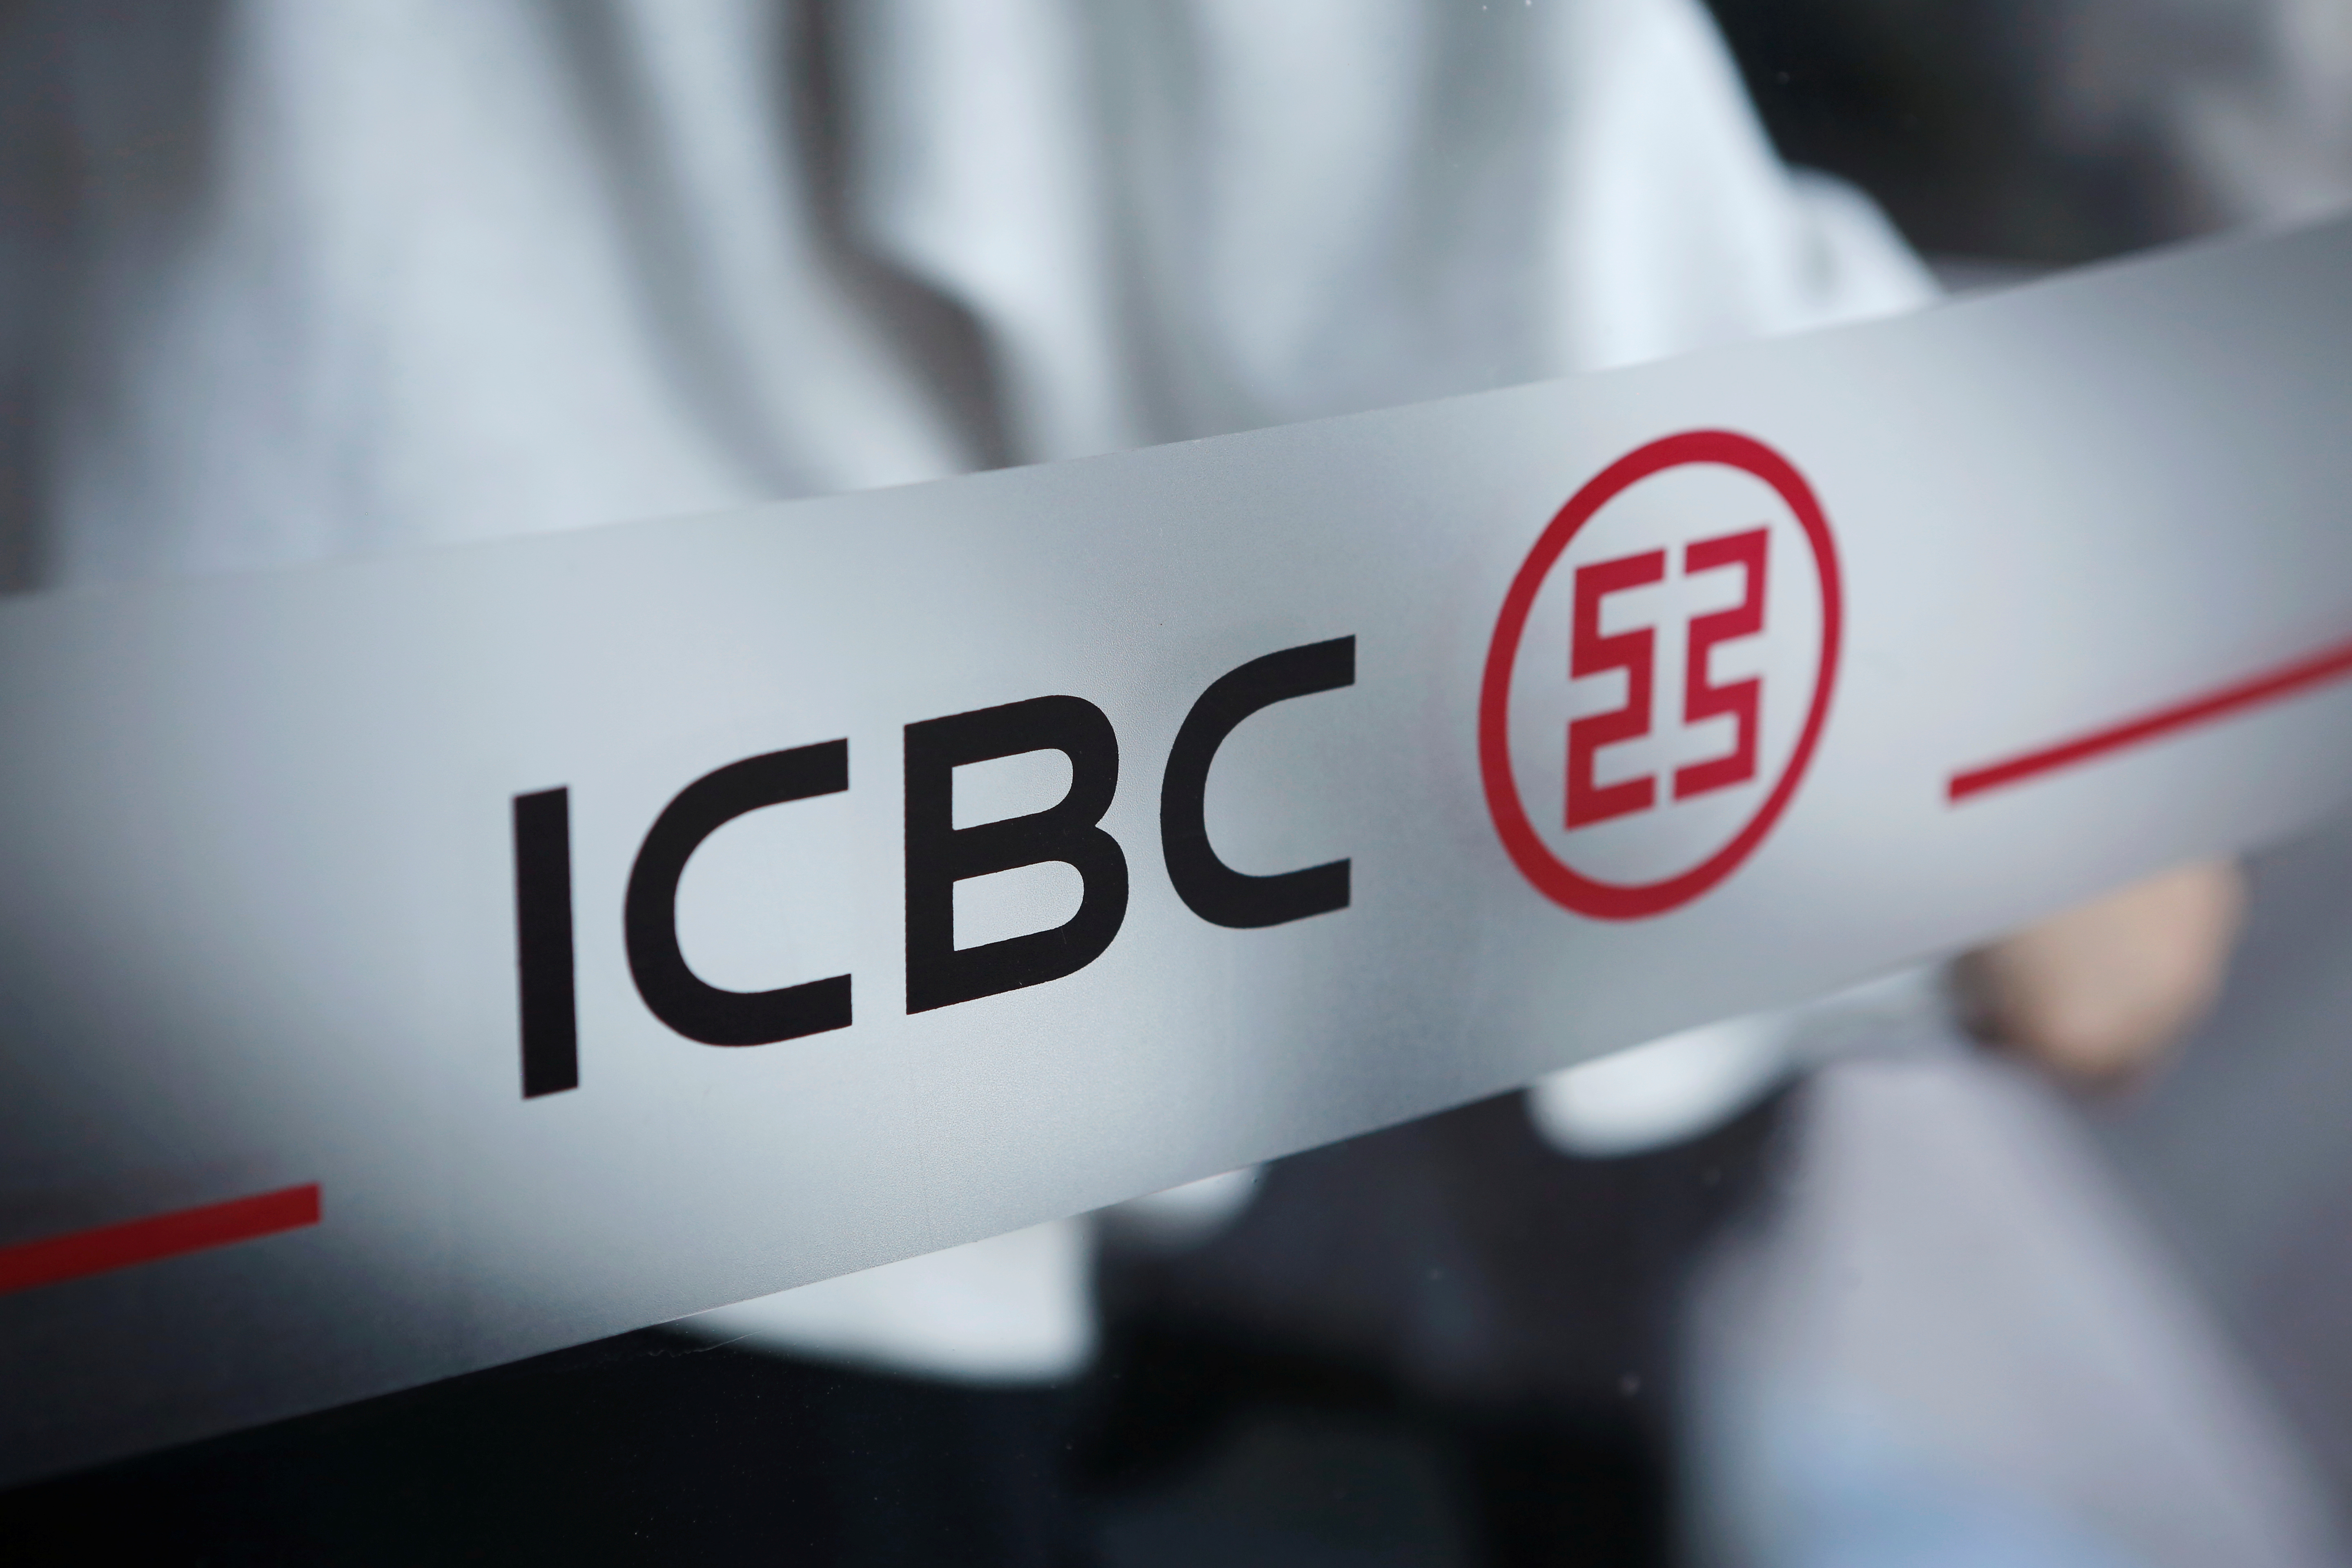 The logo of the Industrial and Commercial Bank of China (ICBC) is displayed at the entrance to its branch in Beijing